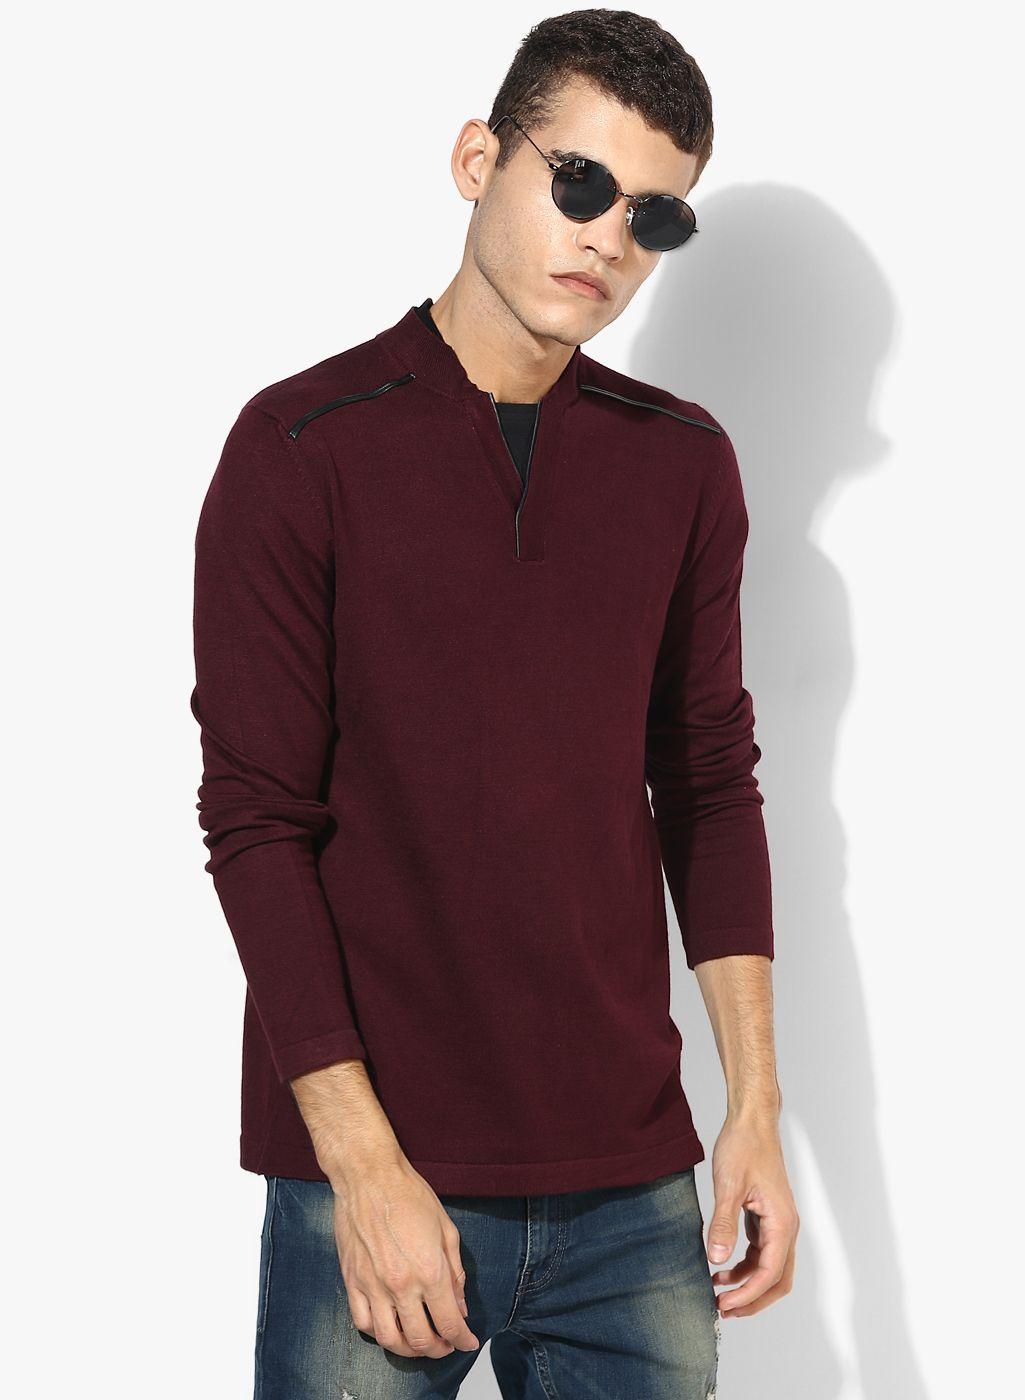 maroon solid sweater